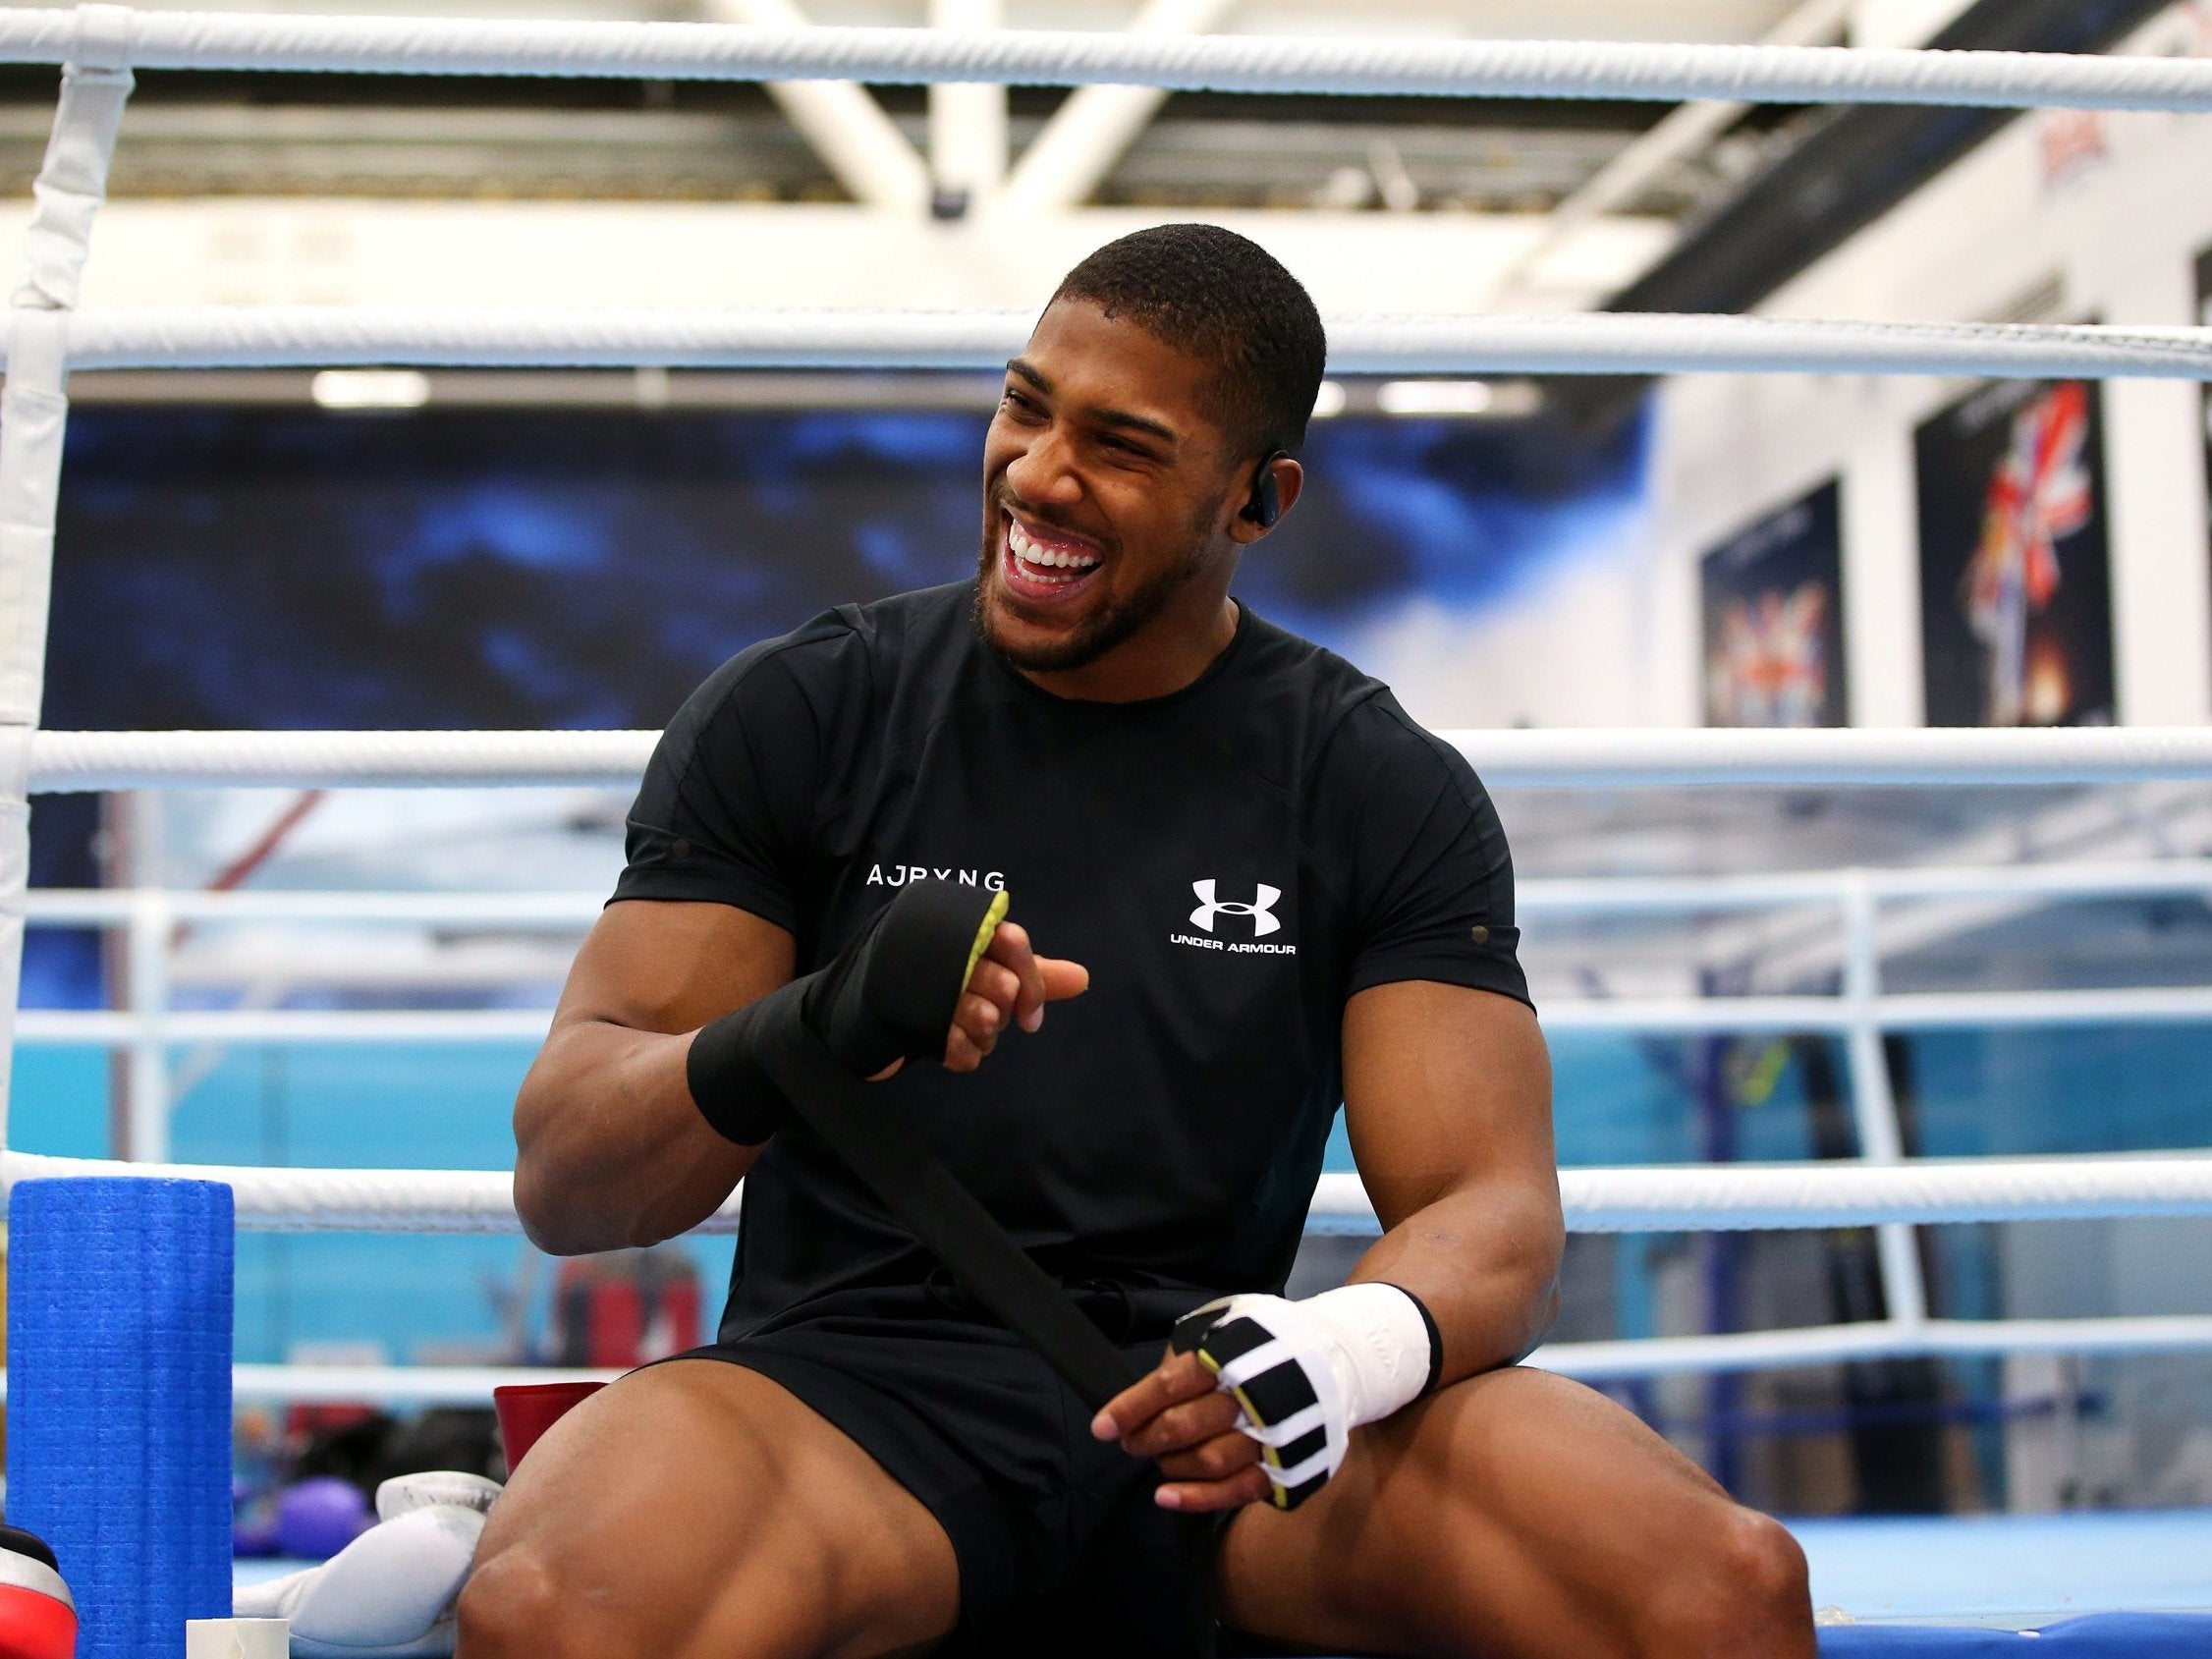 Joshua believes Fury and he will face one another in the near future